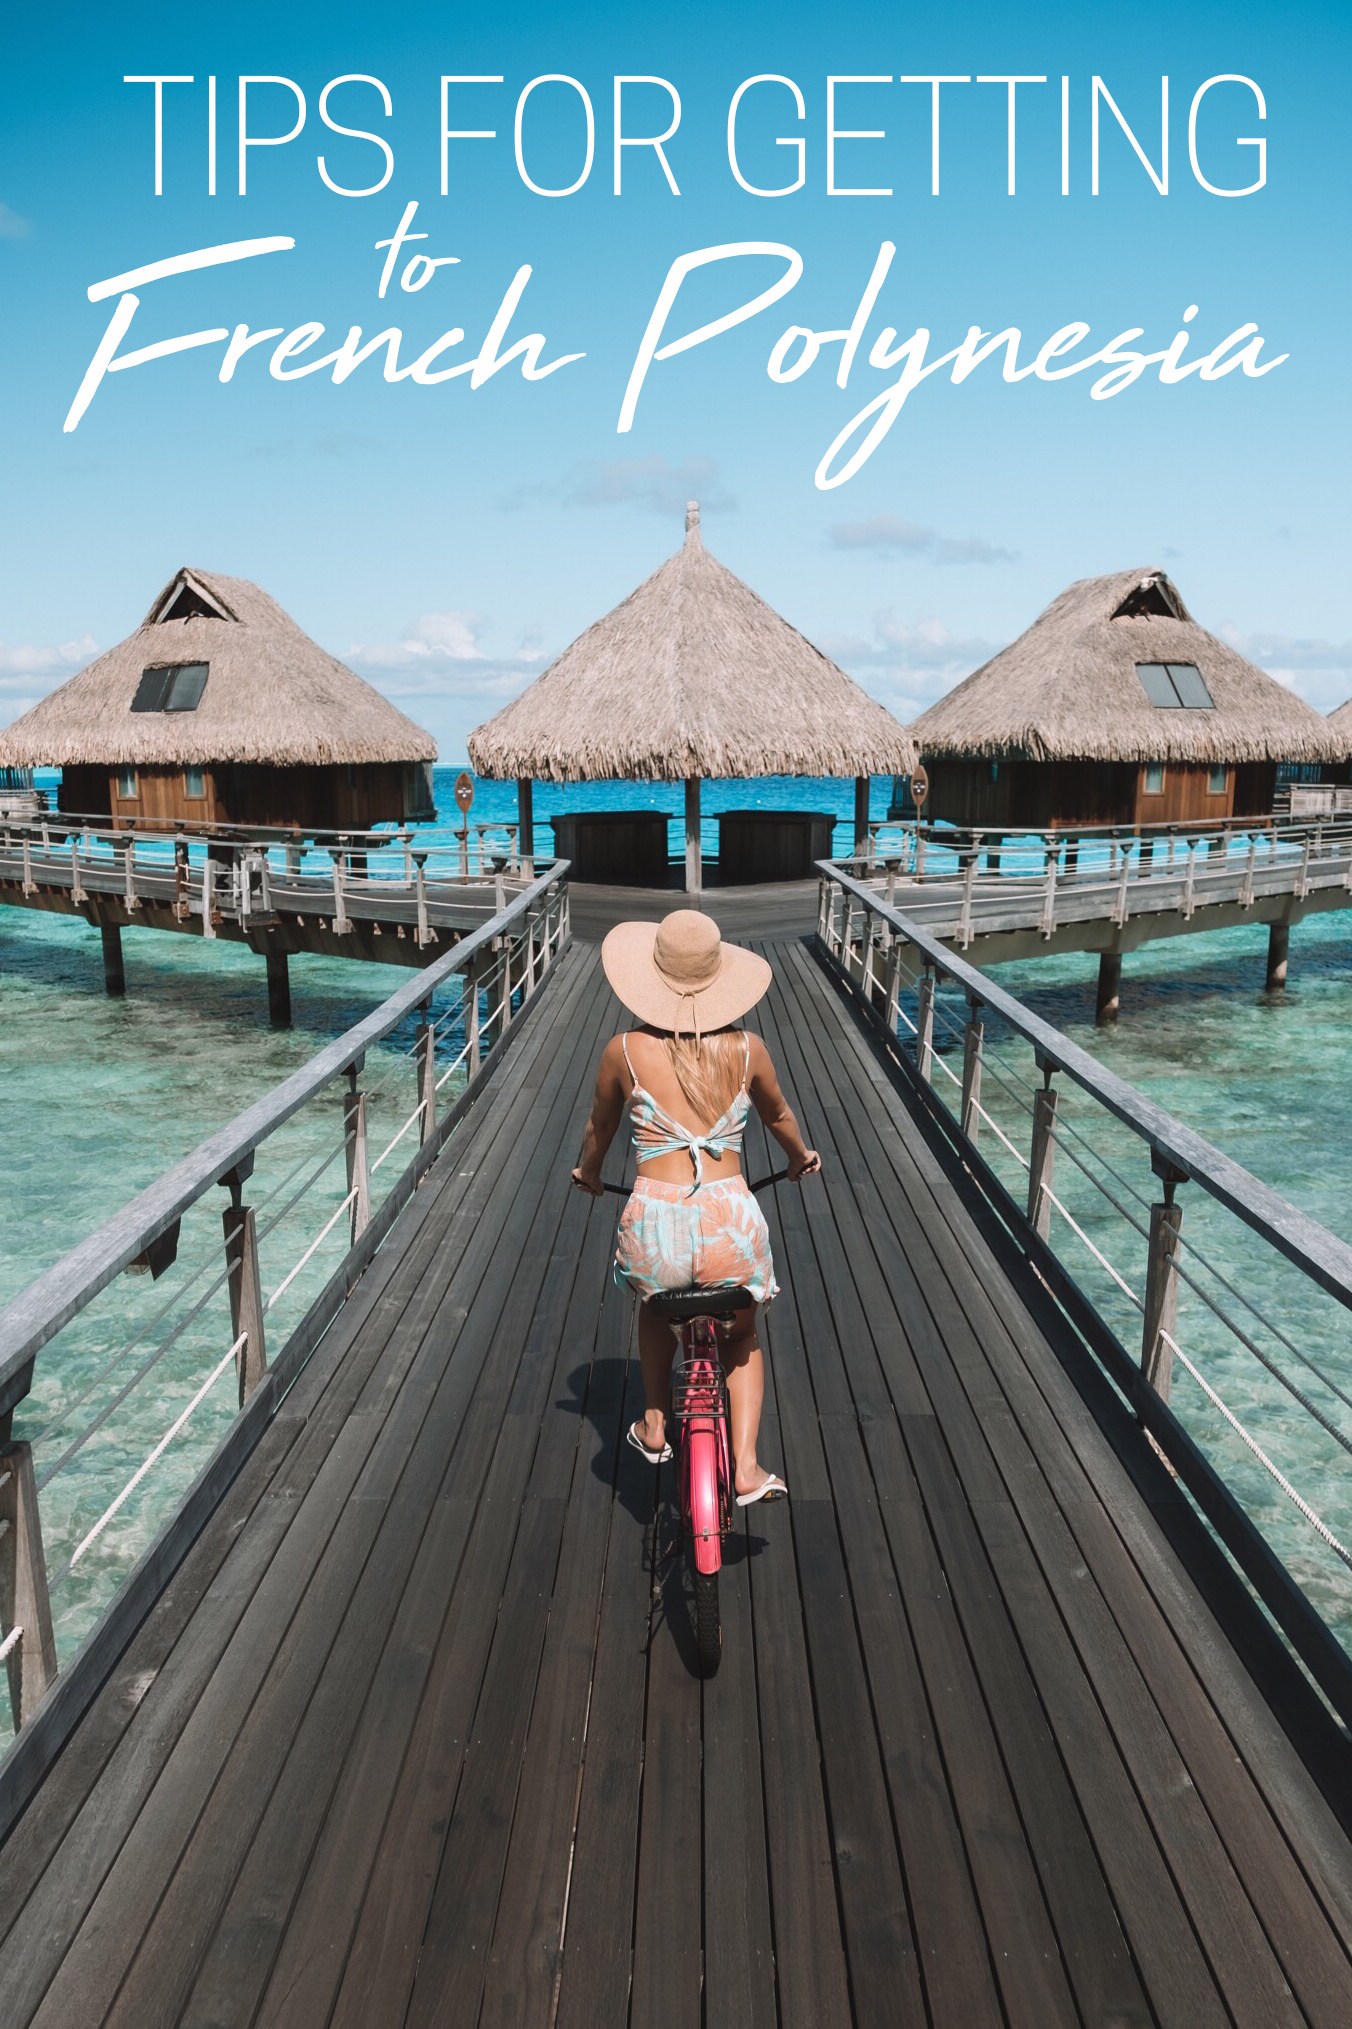 Tips for Getting to French Polynesia